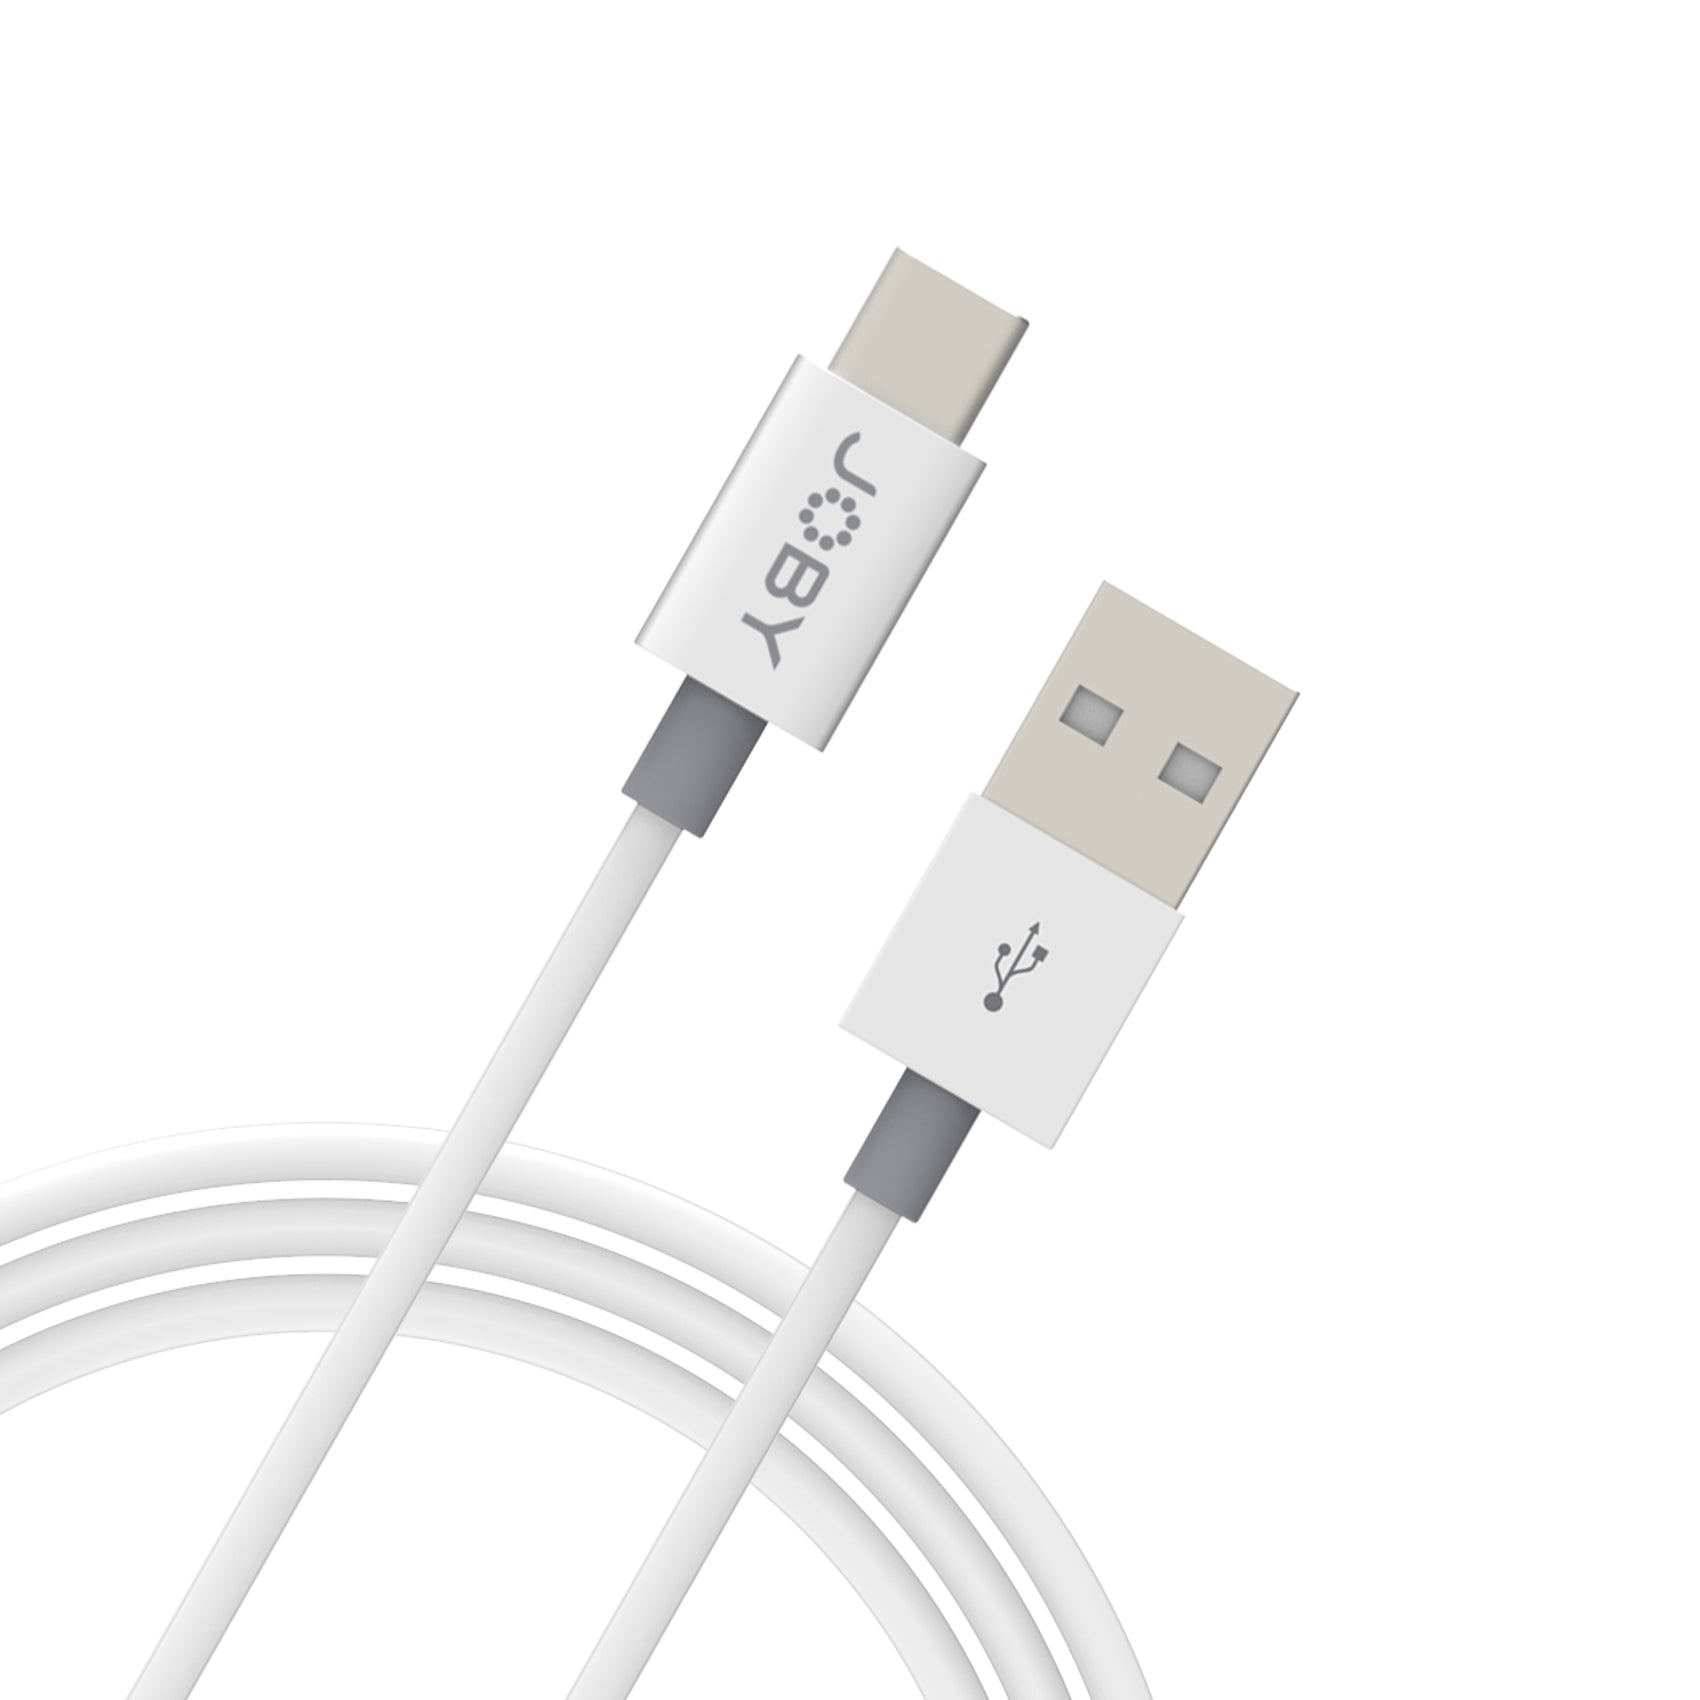 Joby Charge and Sync Cable USB-A to USB-C - 1.2m/4ft